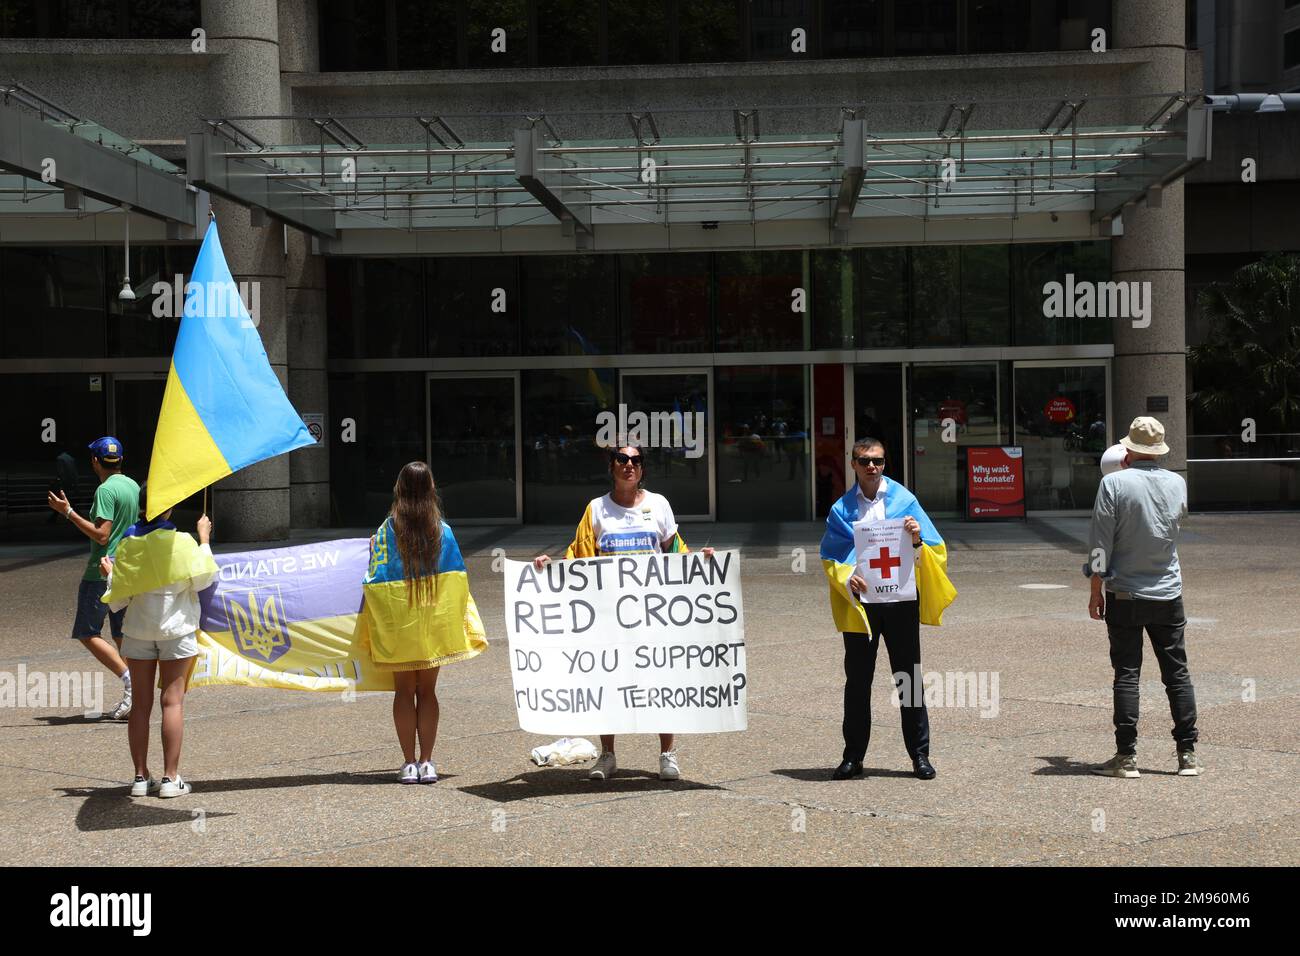 Sydney, Australia. 17th January 2023. Ukrainians and their supporters continued the protests outside the Sydney offices of Red Cross against the Russian Red Cross aiding the Russian military. Credit: Richard Milnes/Alamy Live News Stock Photo